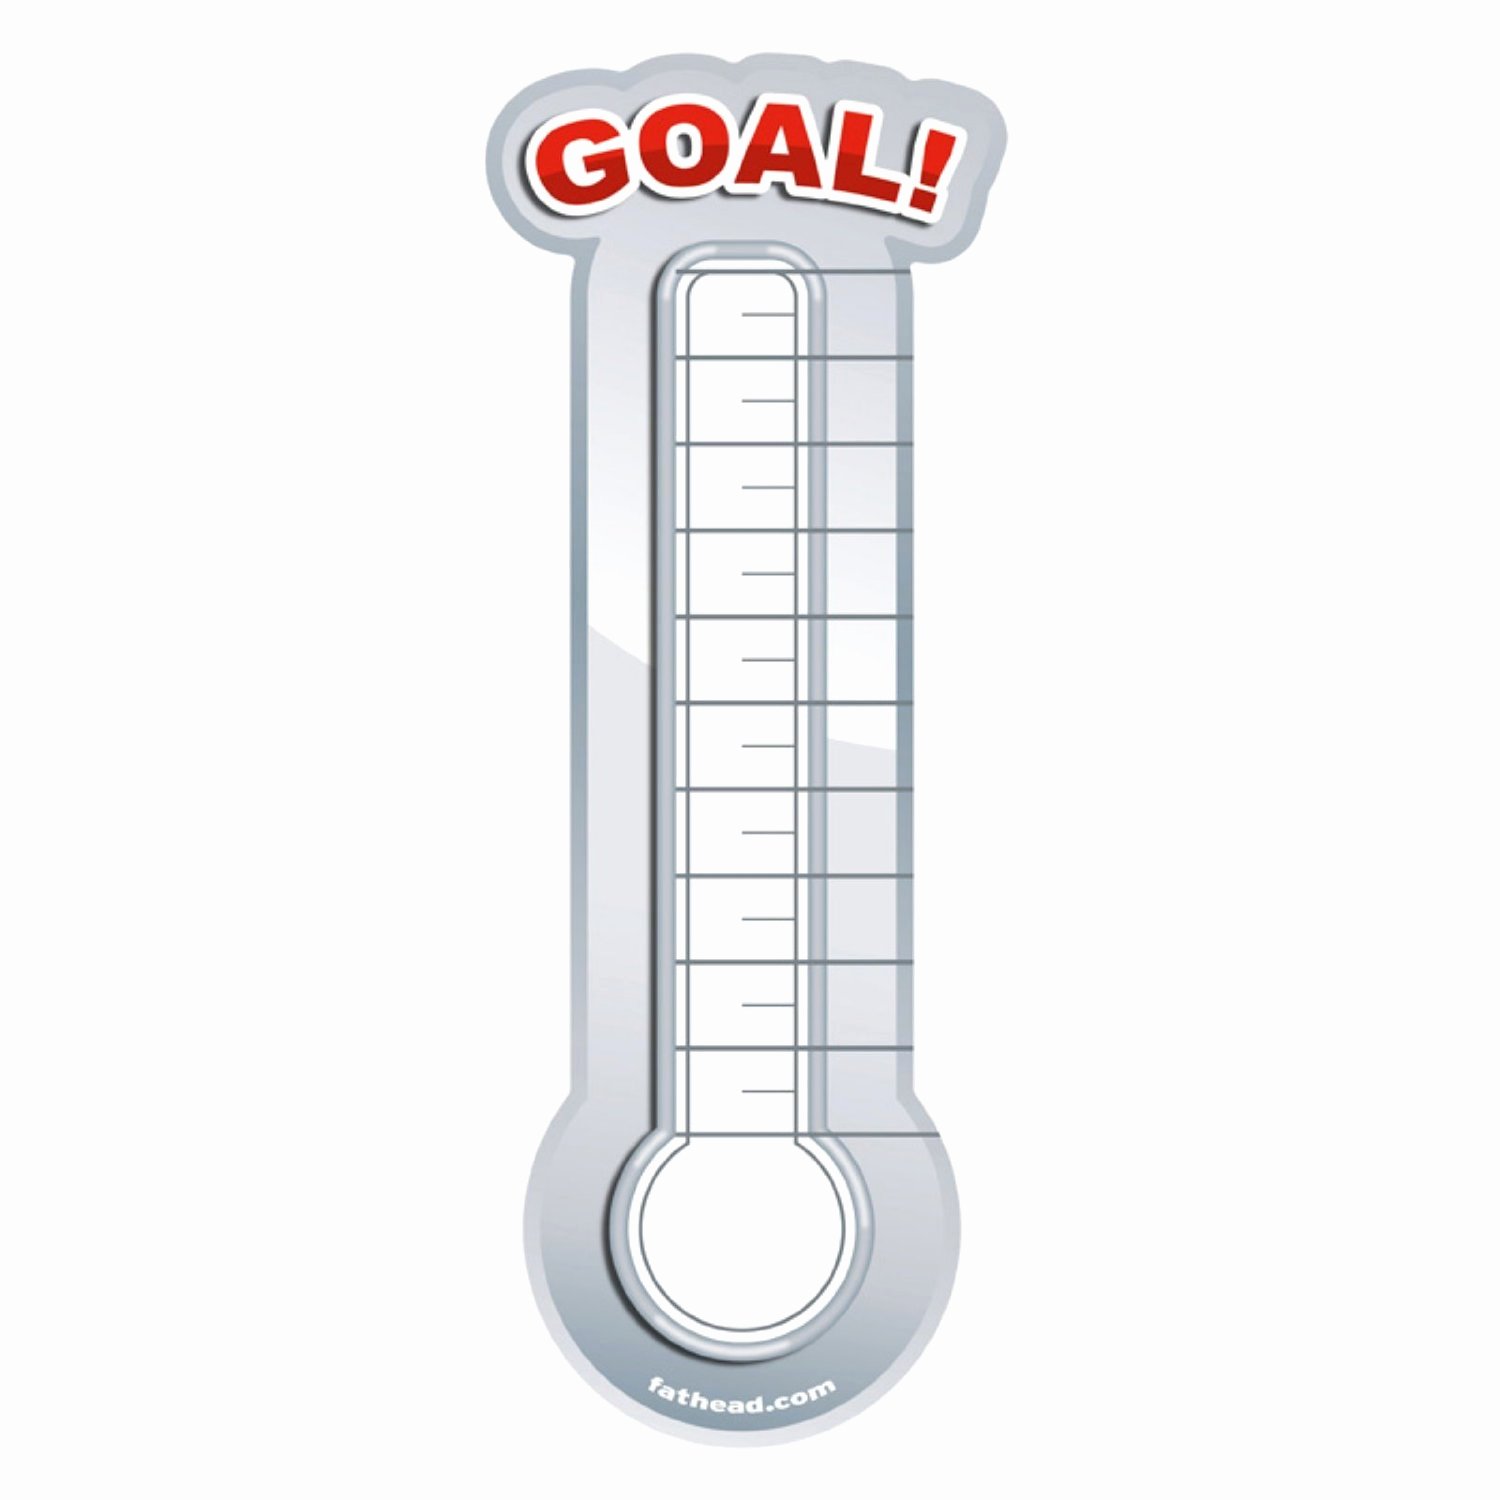 Fundraising thermometer Template Powerpoint Best Of Fundraising thermometer Template